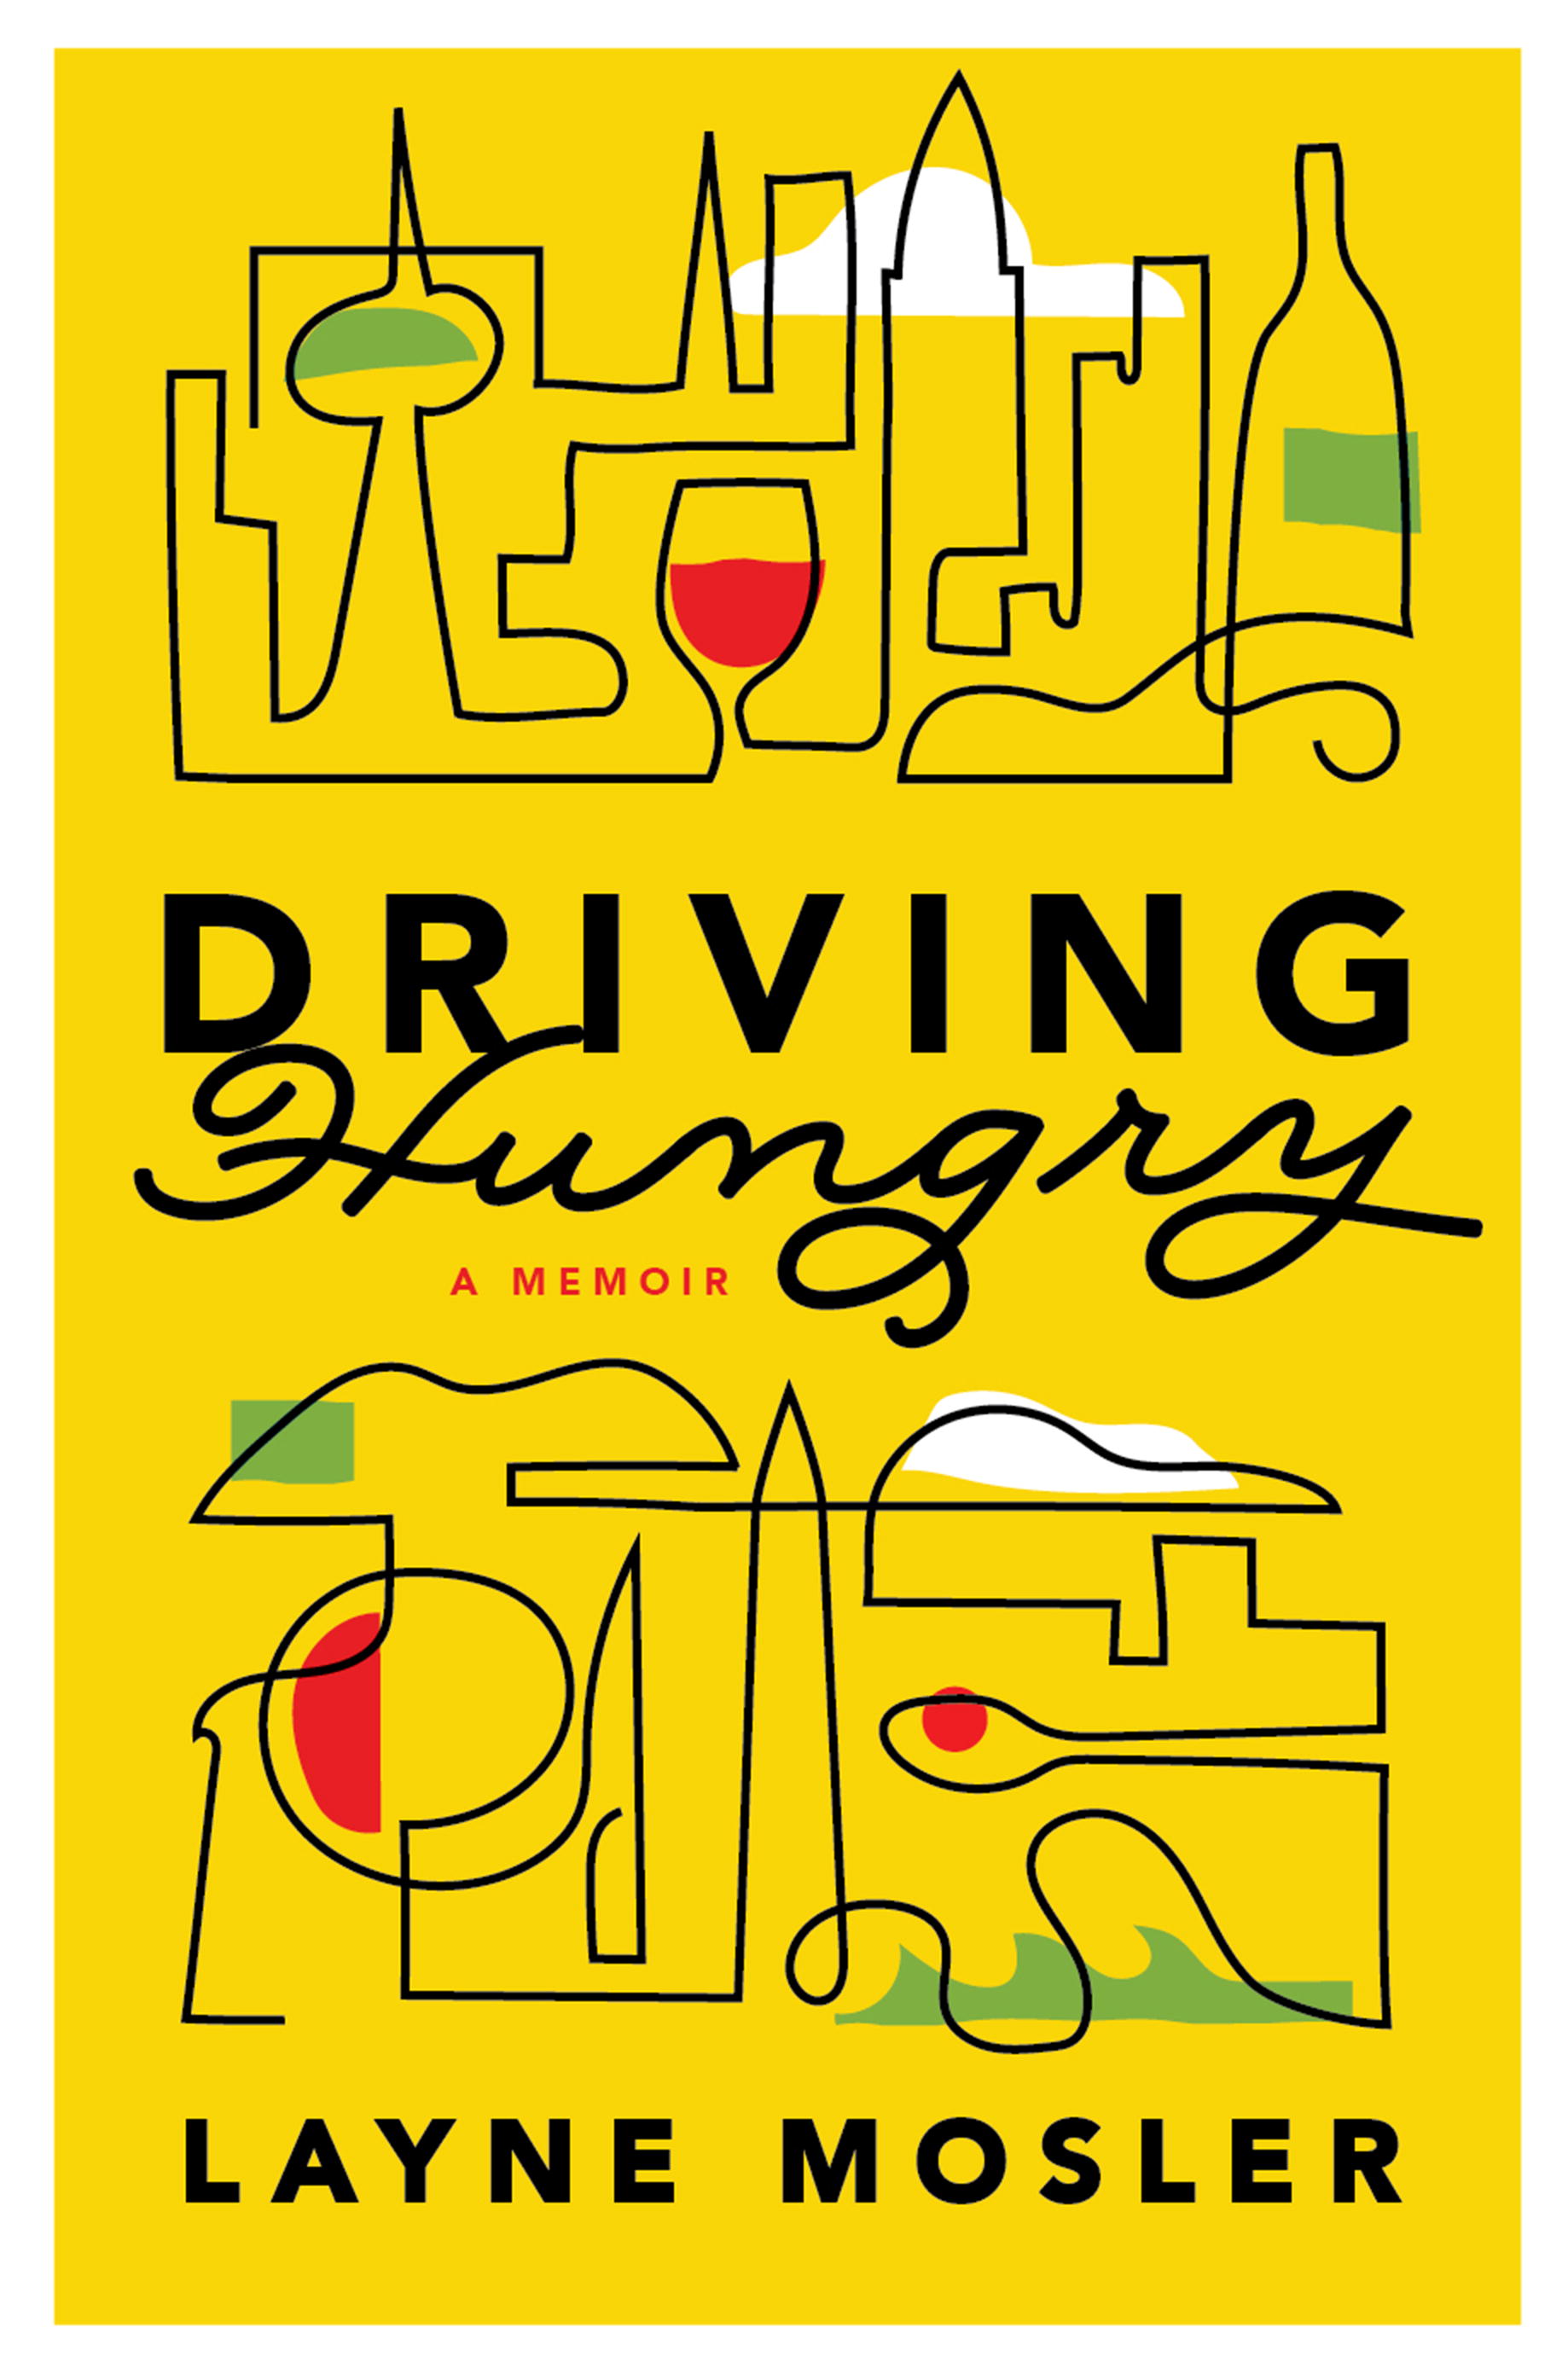 'Driving Hungry' by Layne Mosler.